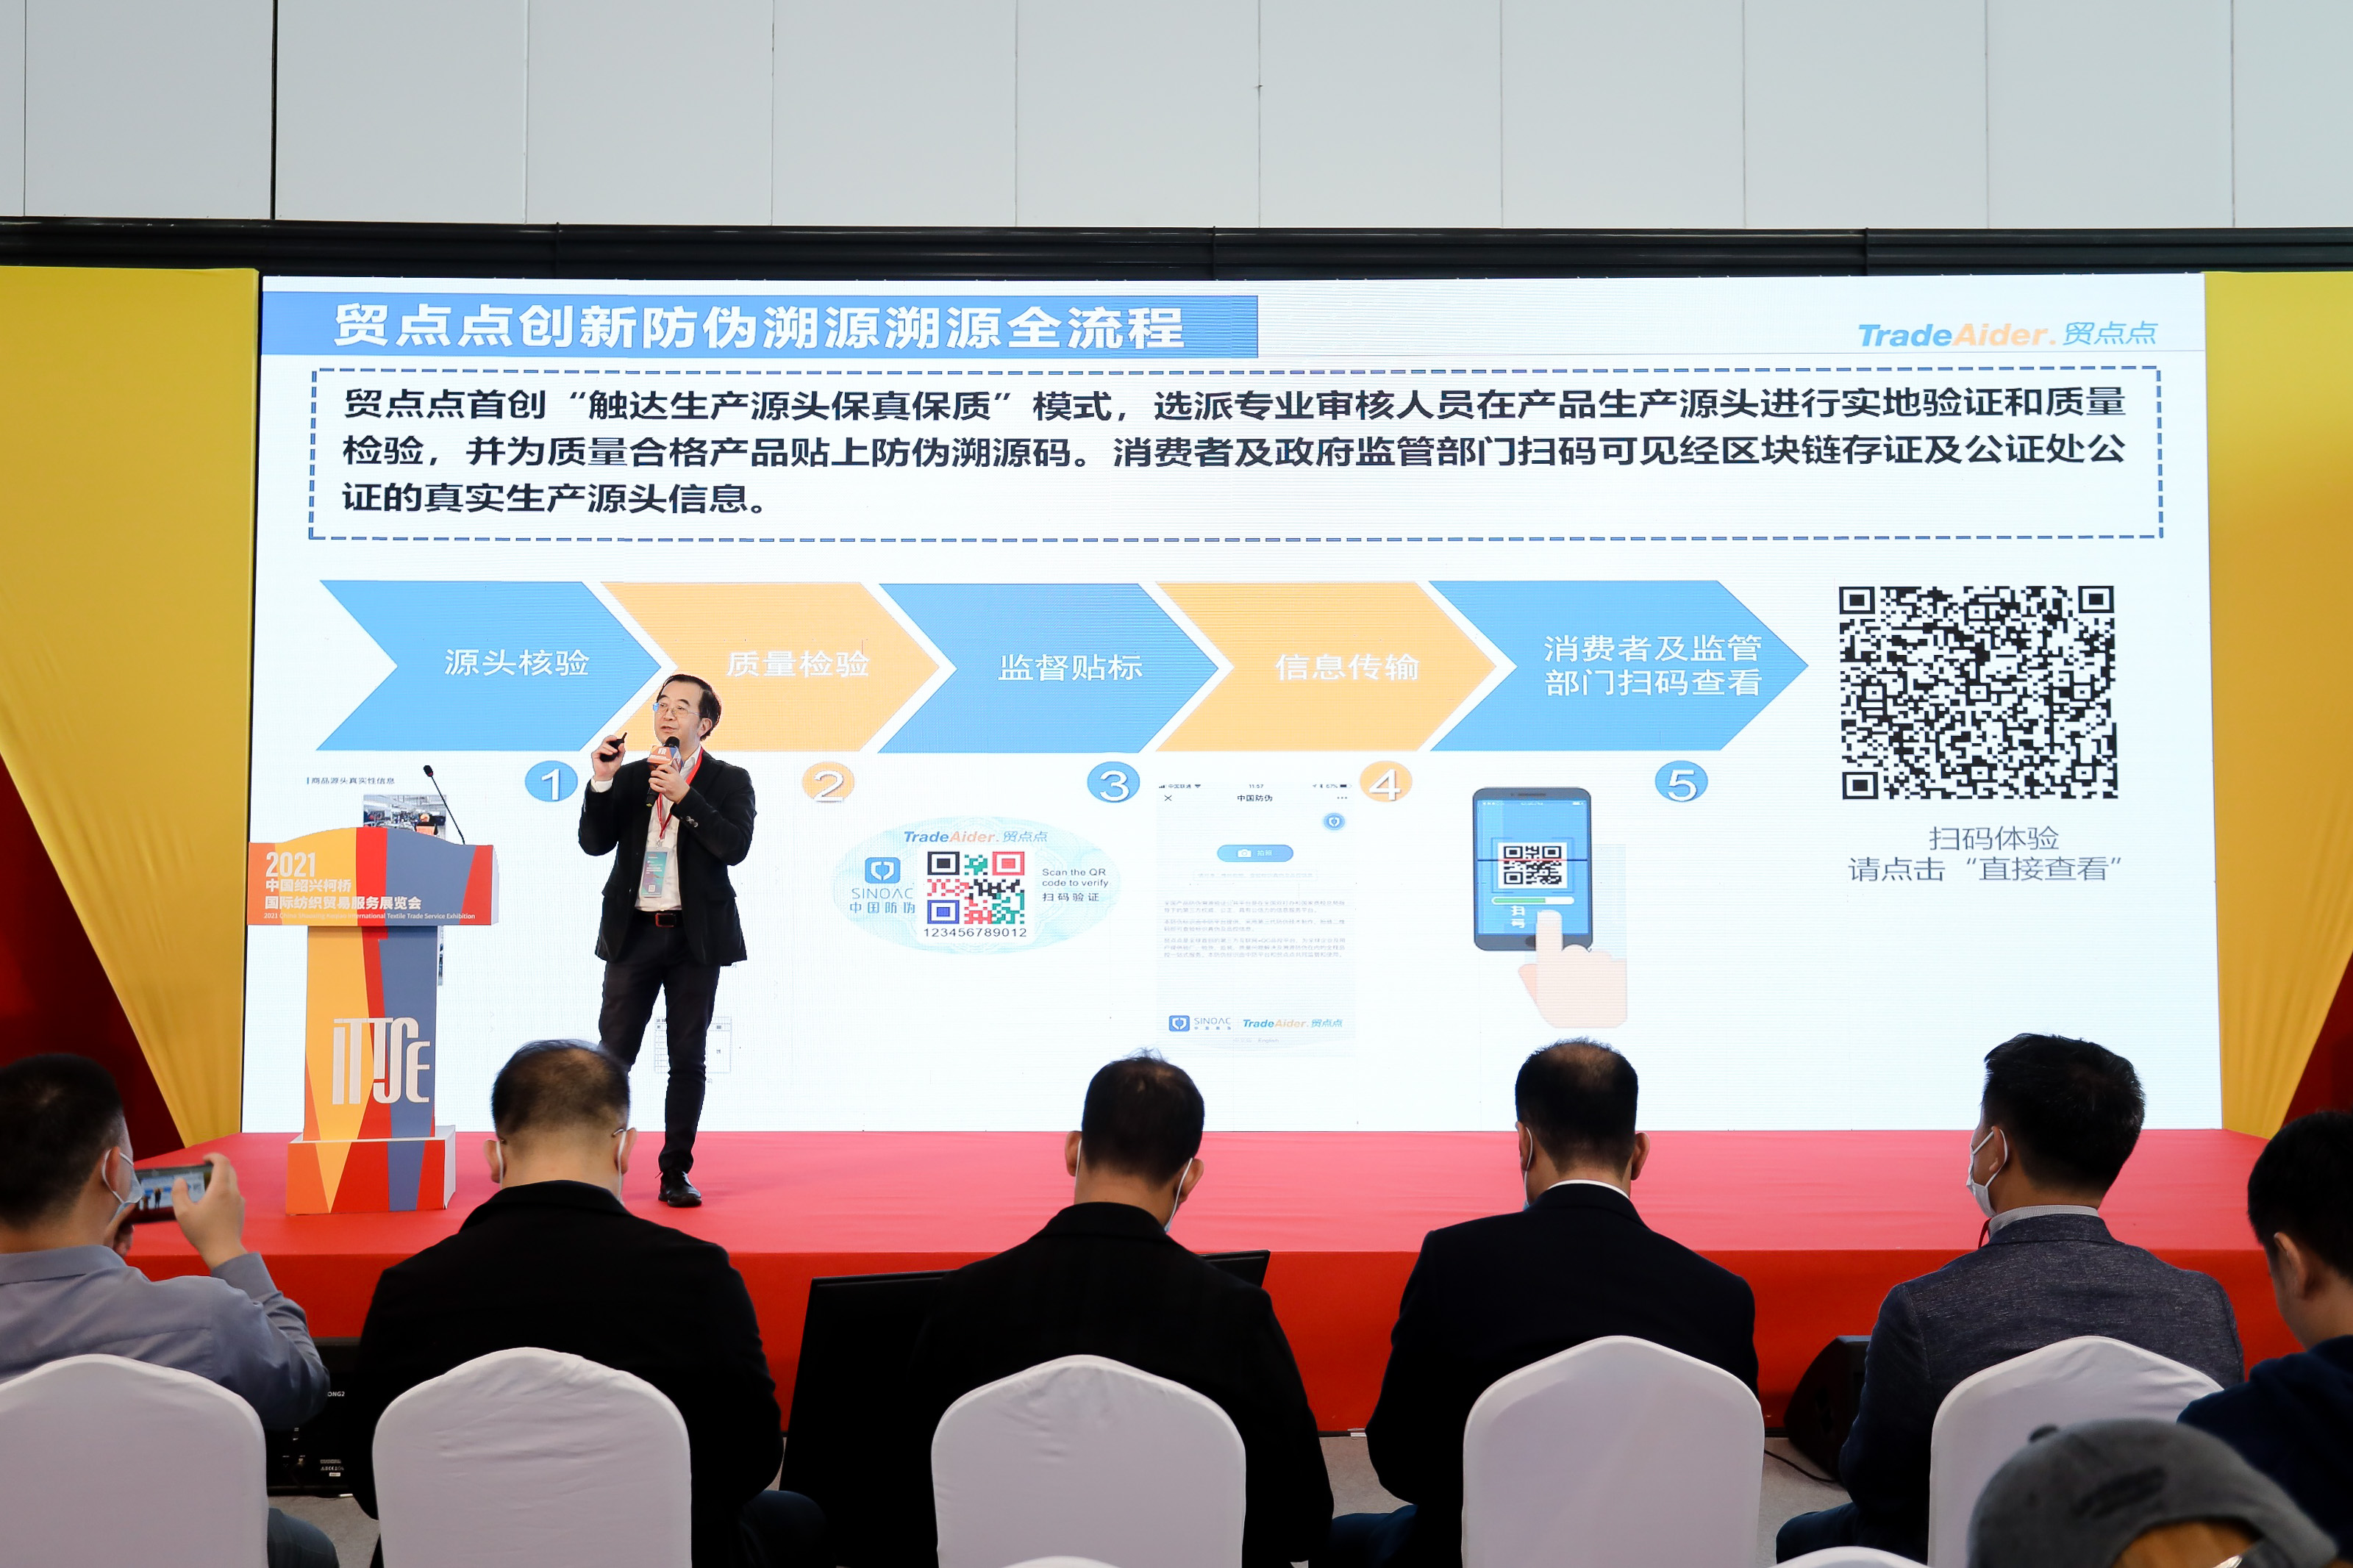 Chen Liang, founder of TradeAider, delivered a keynote speech.